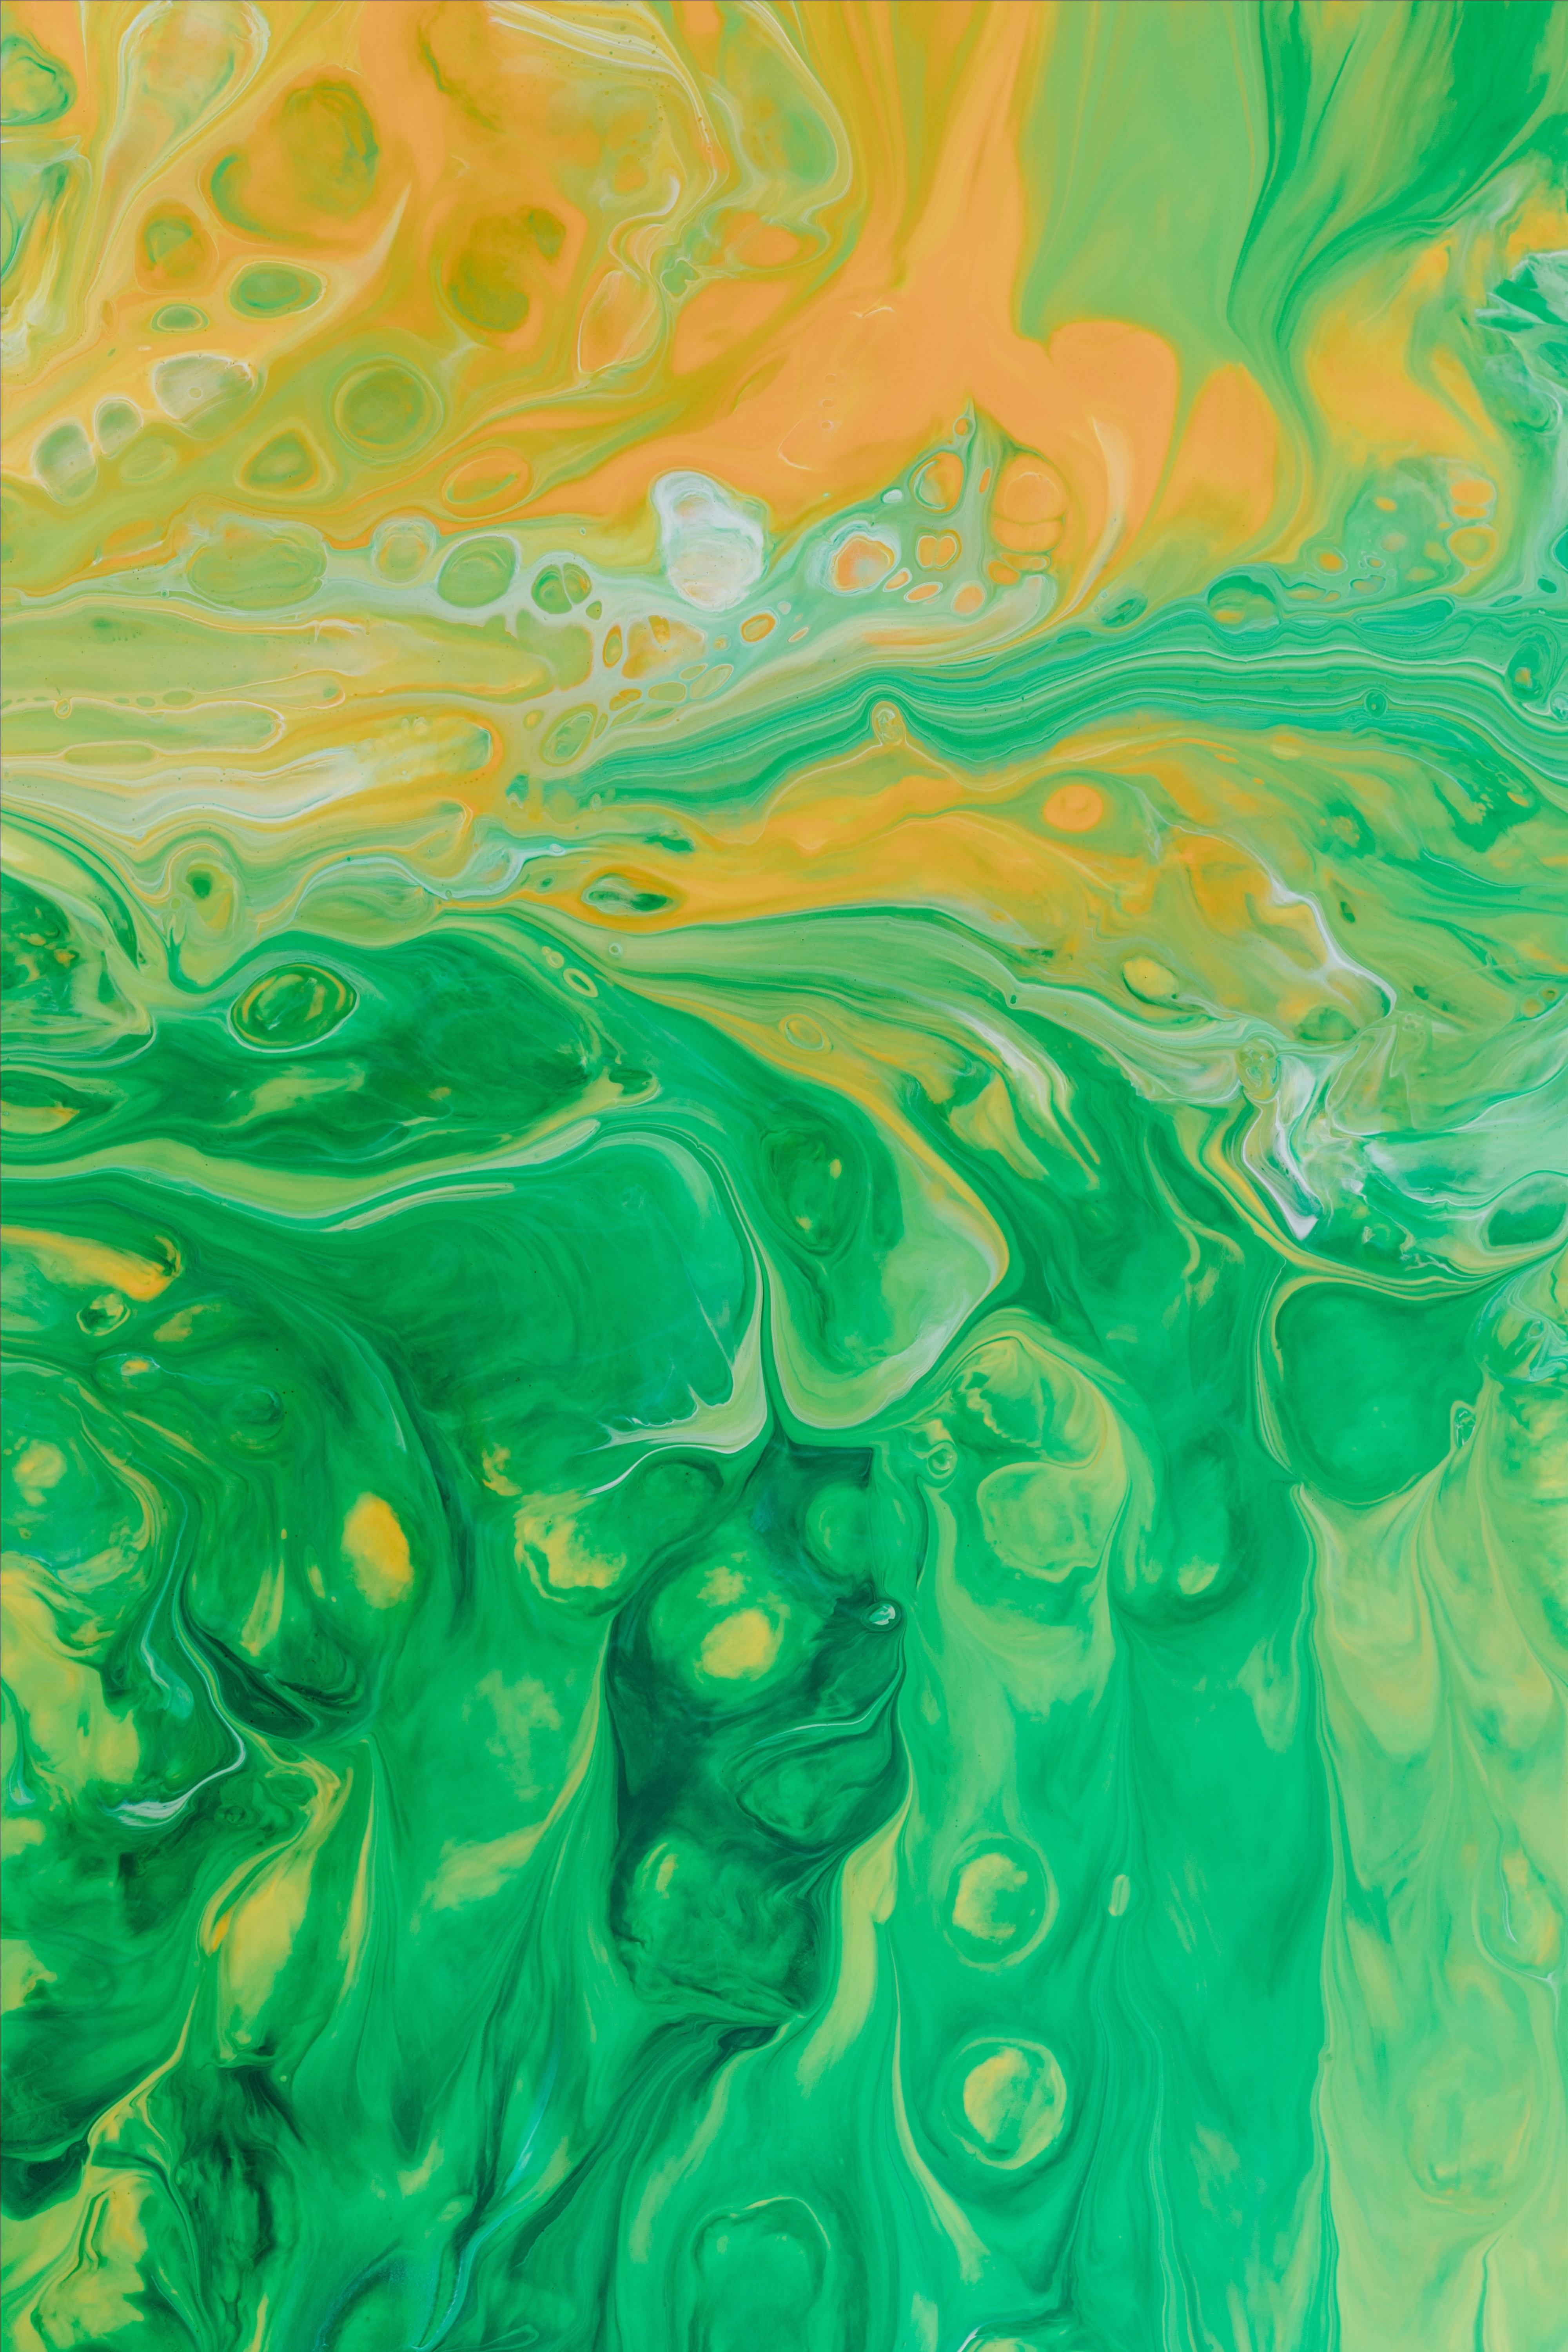 light, divorces, paint, abstract, green, light coloured, stains, spots 1080p